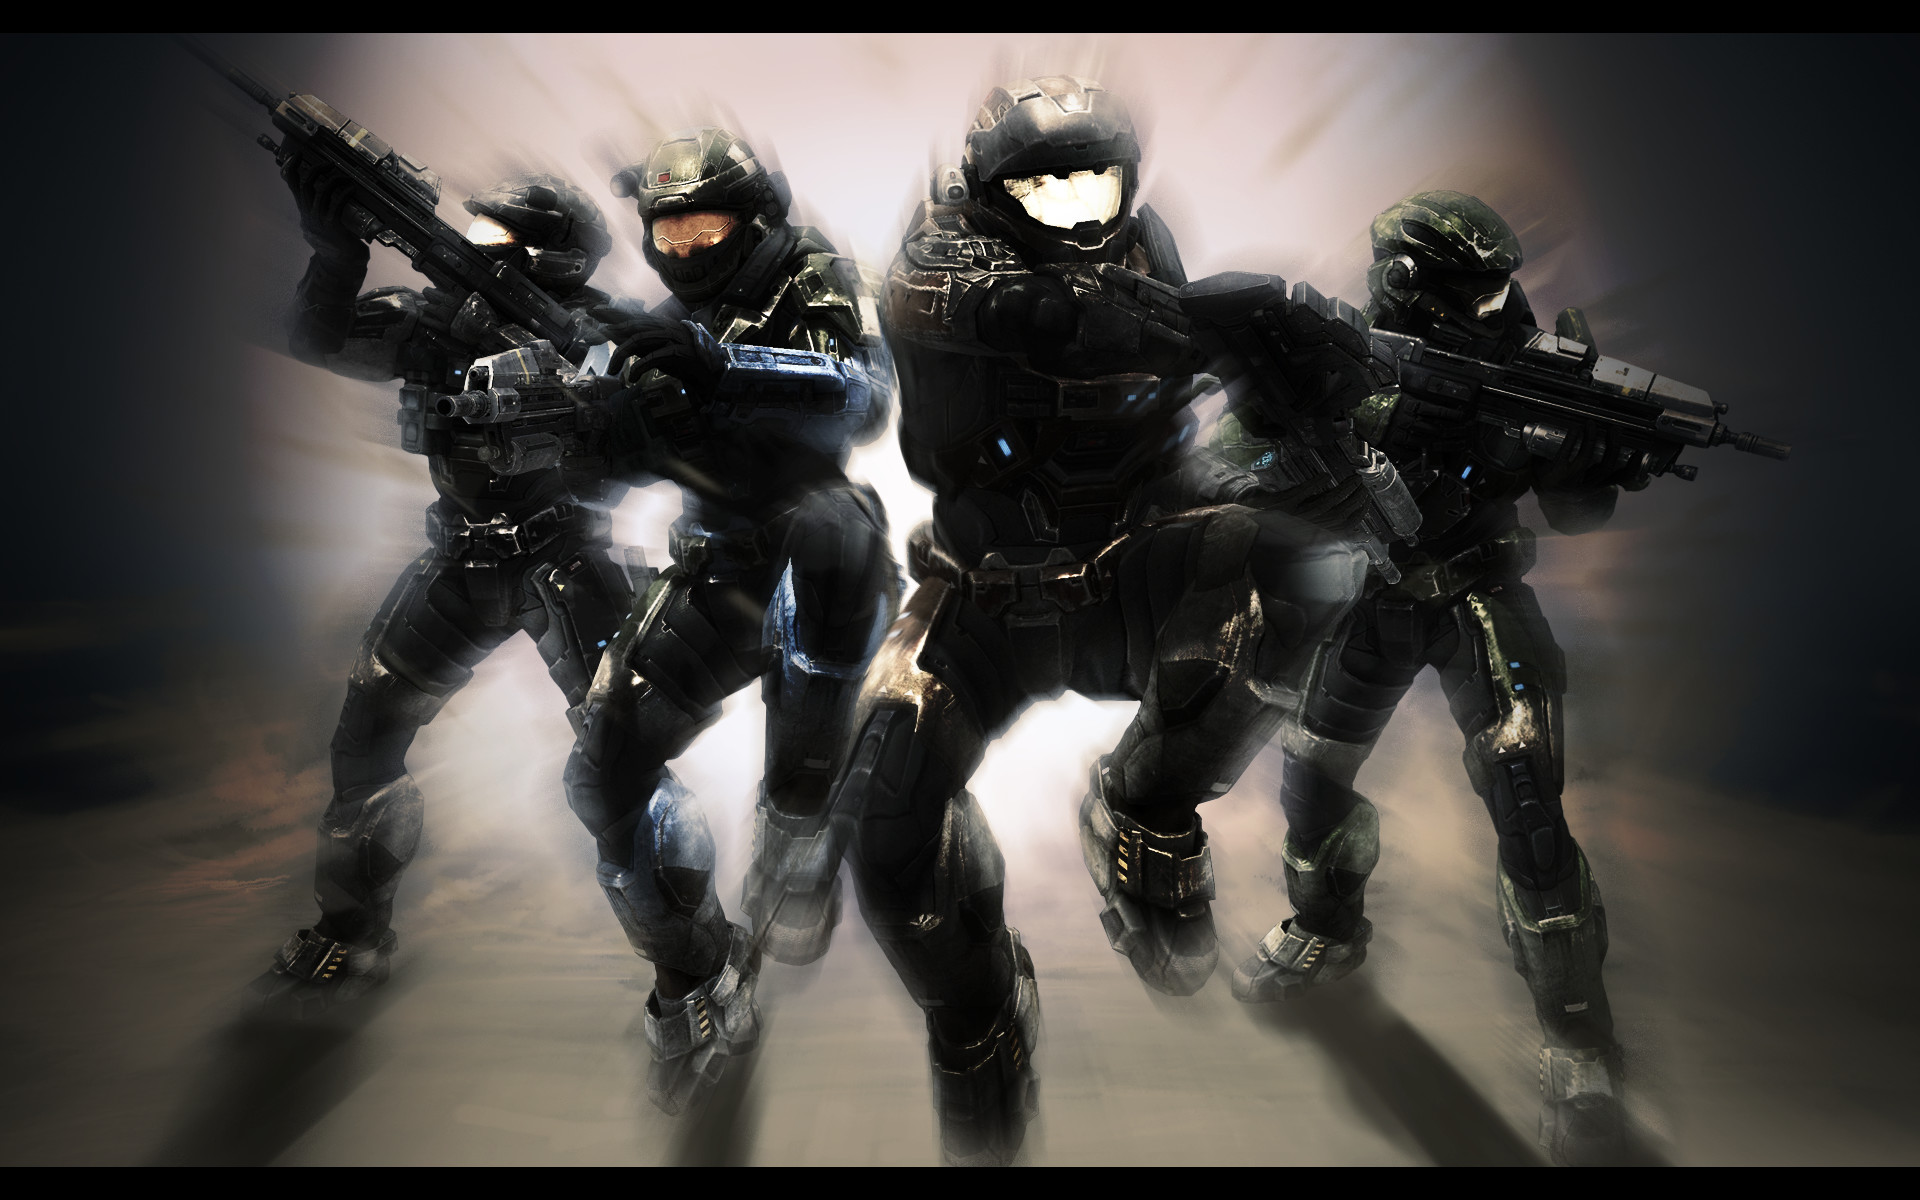 1920x1200 Epic Halo Reach Wallpapers #4BVF8D8 Picserio.com